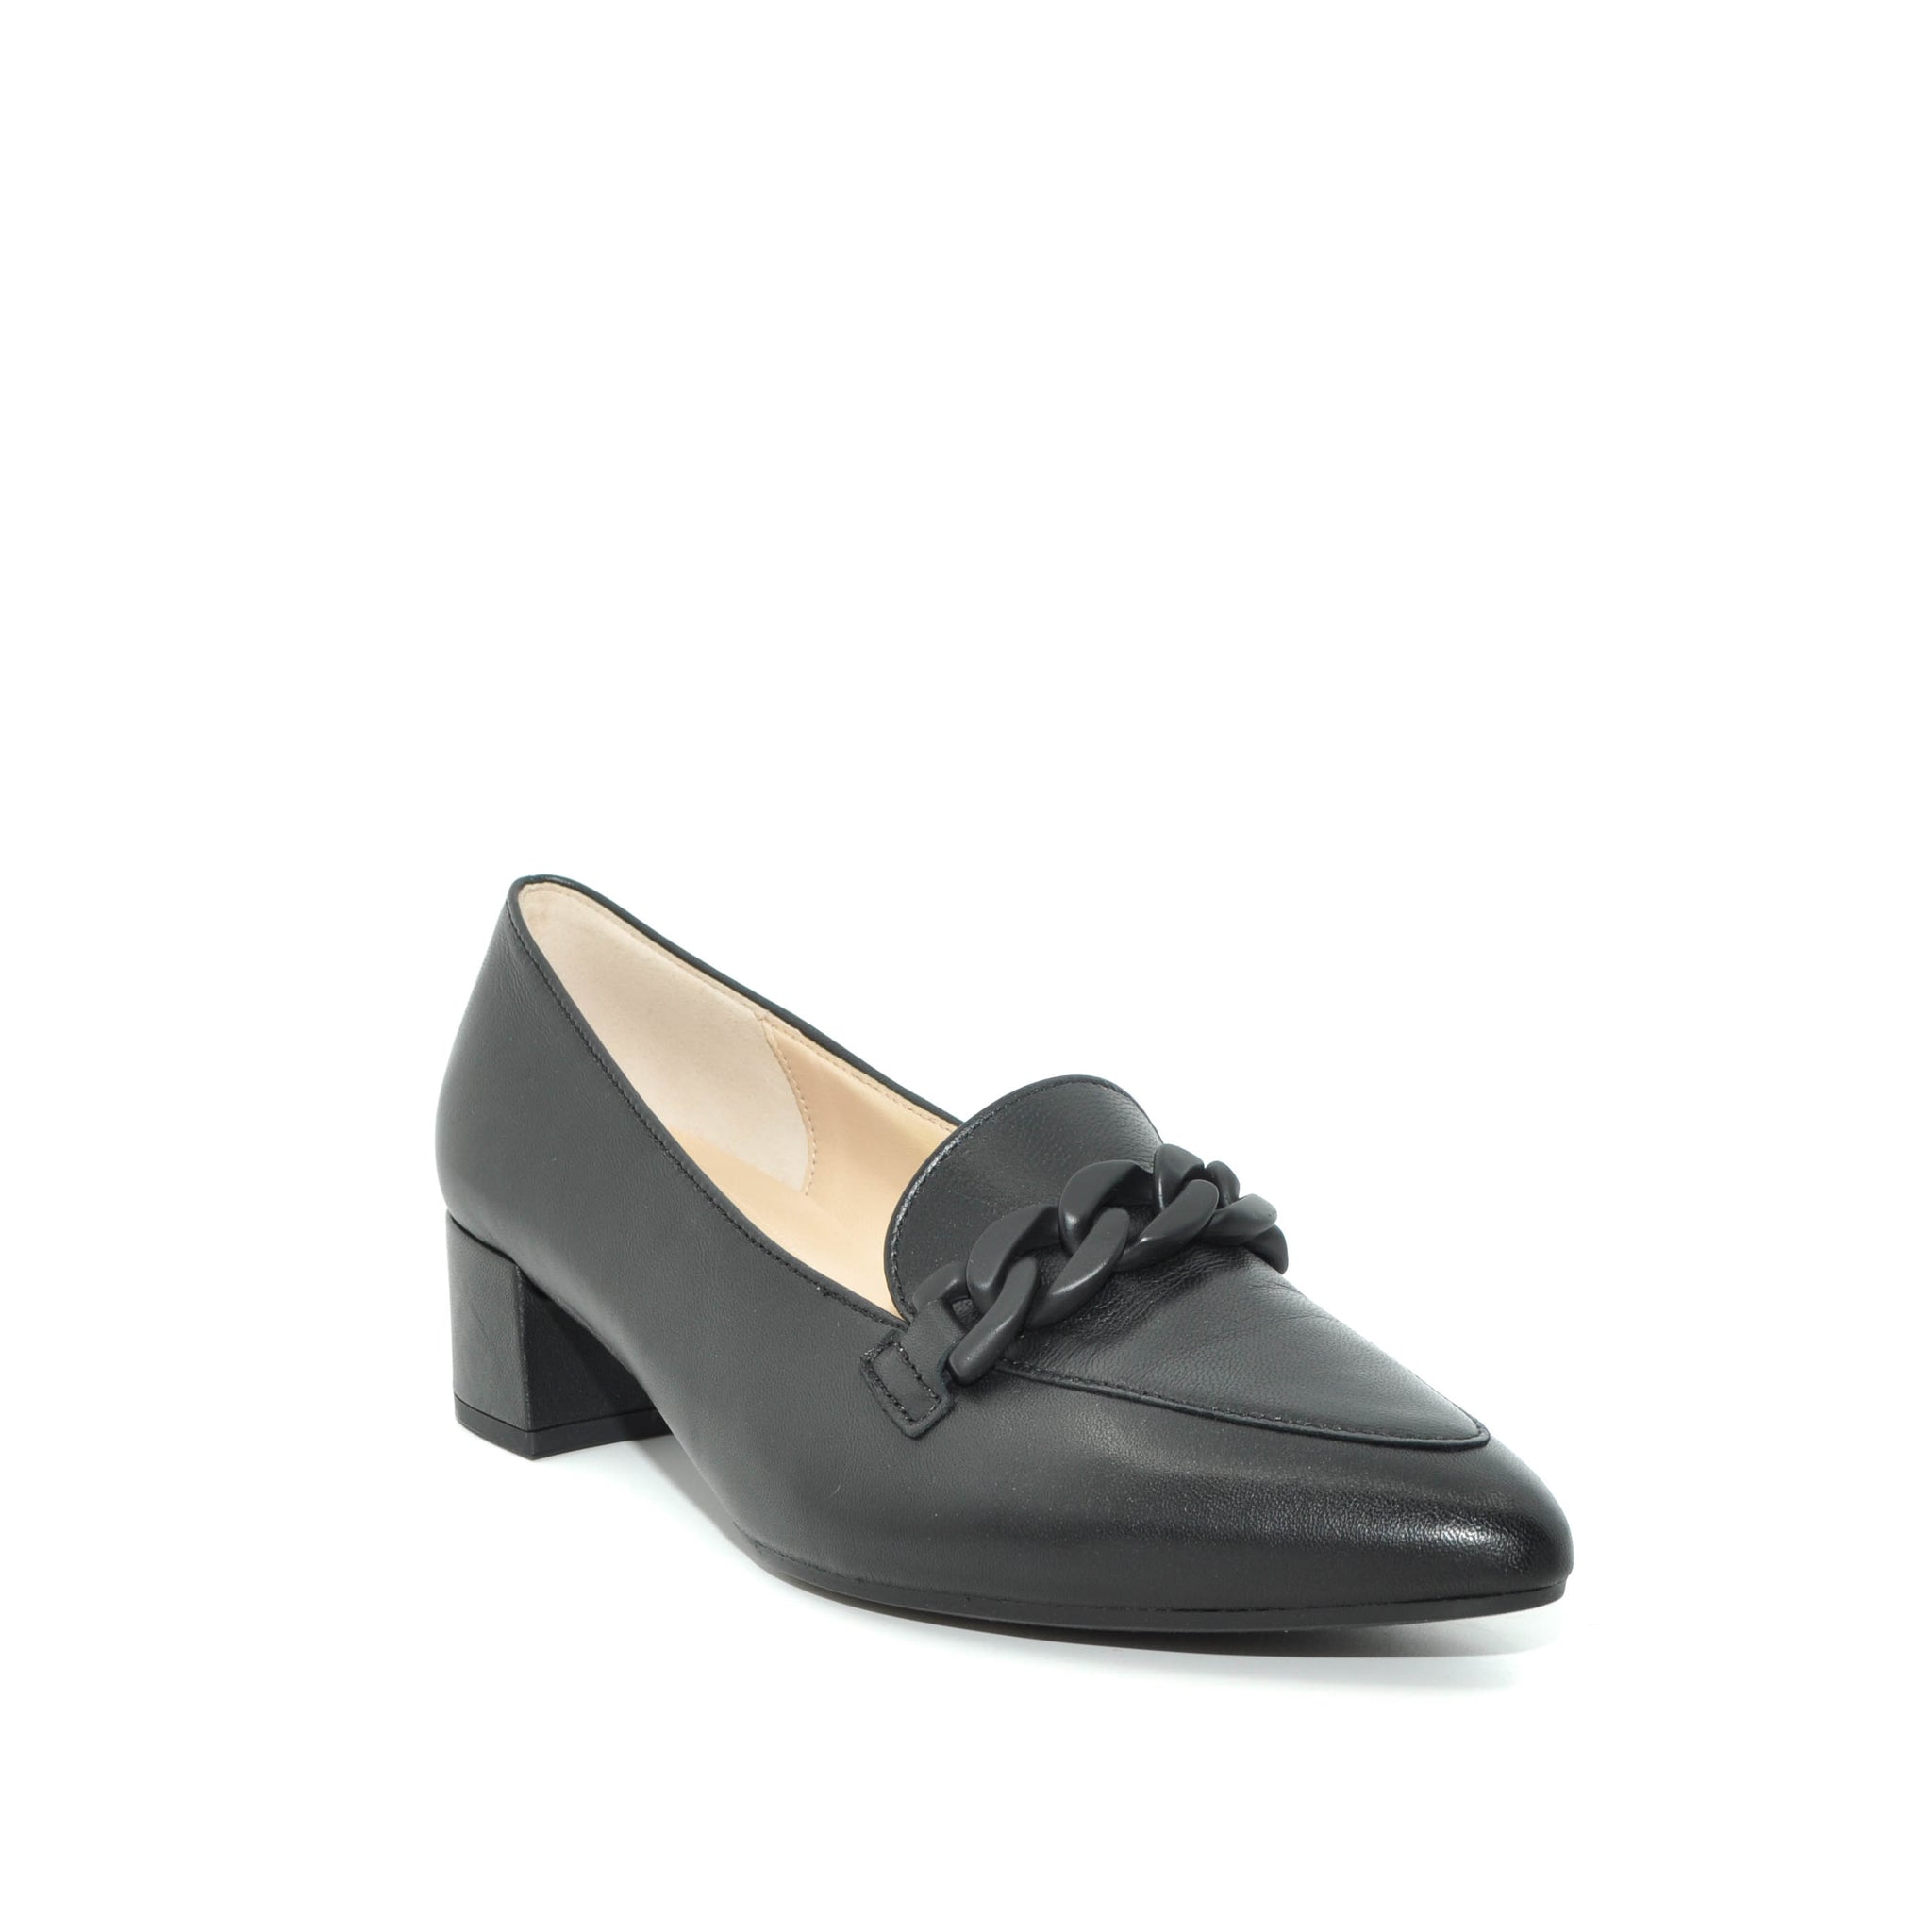 GABOR shoes online | womens flat shoes | chunky heels ladies loafers